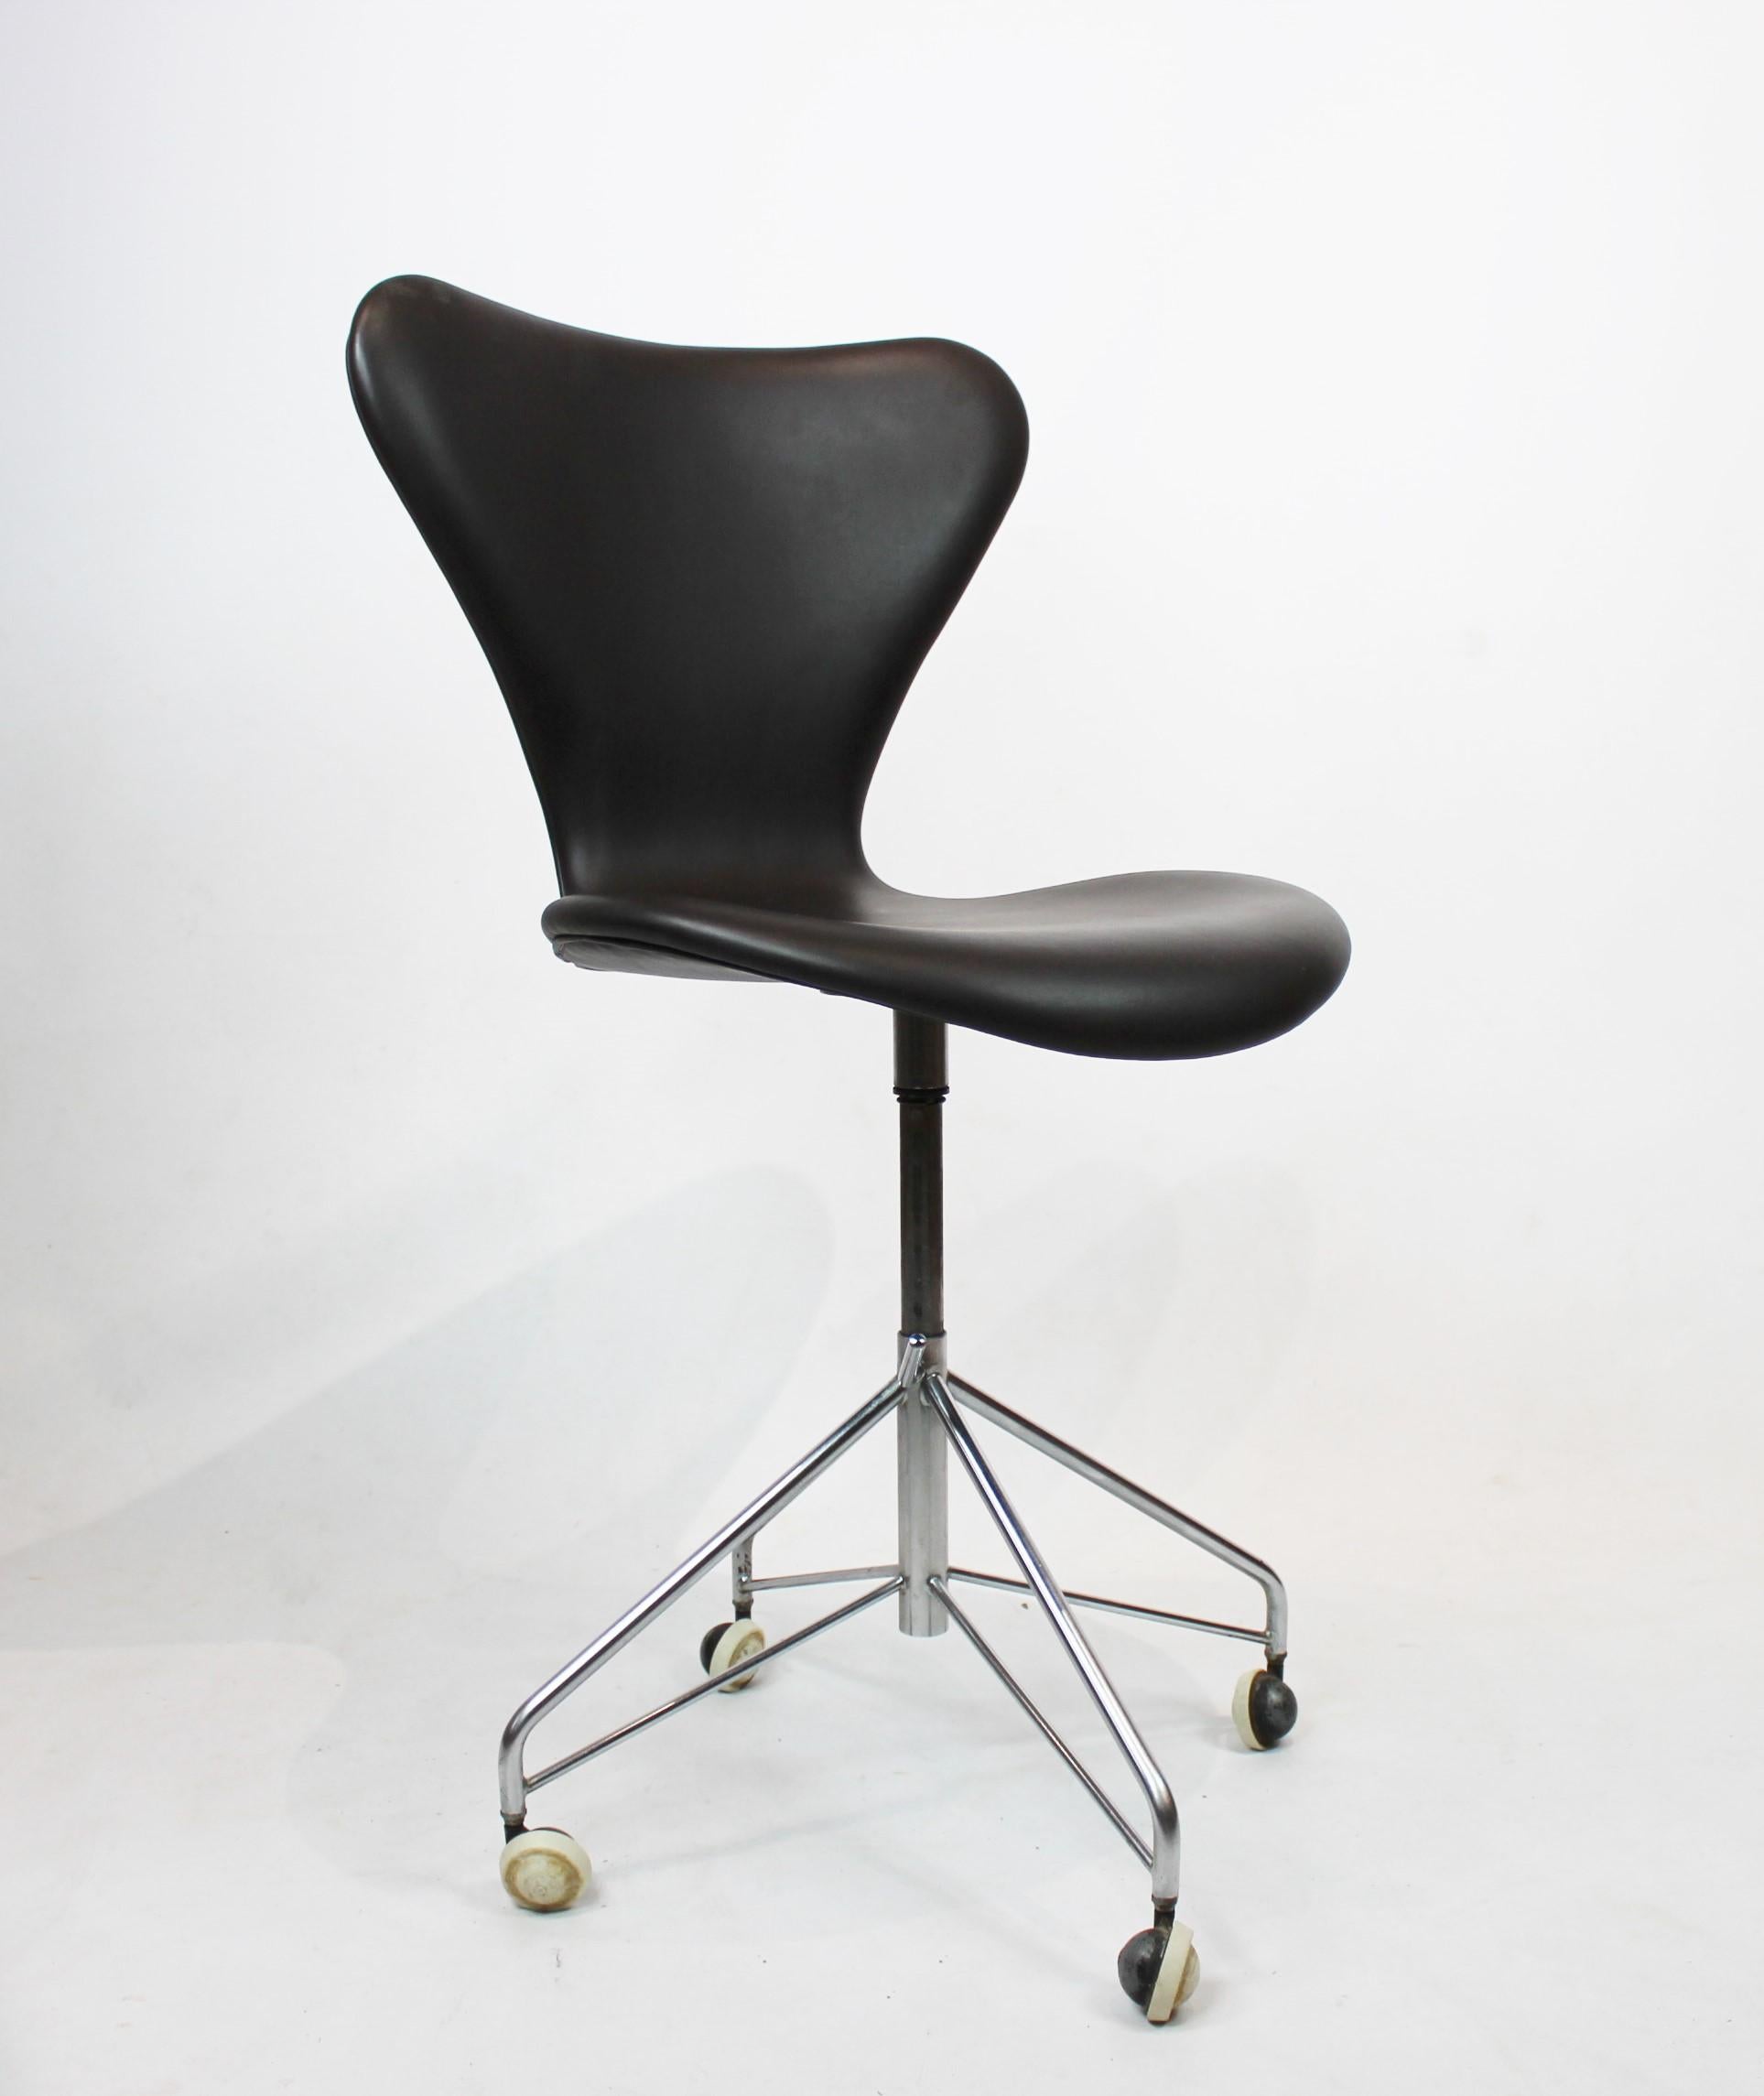 Series Seven office chair, model 3117, without armrests and with swivel function designed by Arne Jacobsen and manufactured by Fritz Hansen in the 1950s. The chair is newly upholstered with dark brown savannah leather.